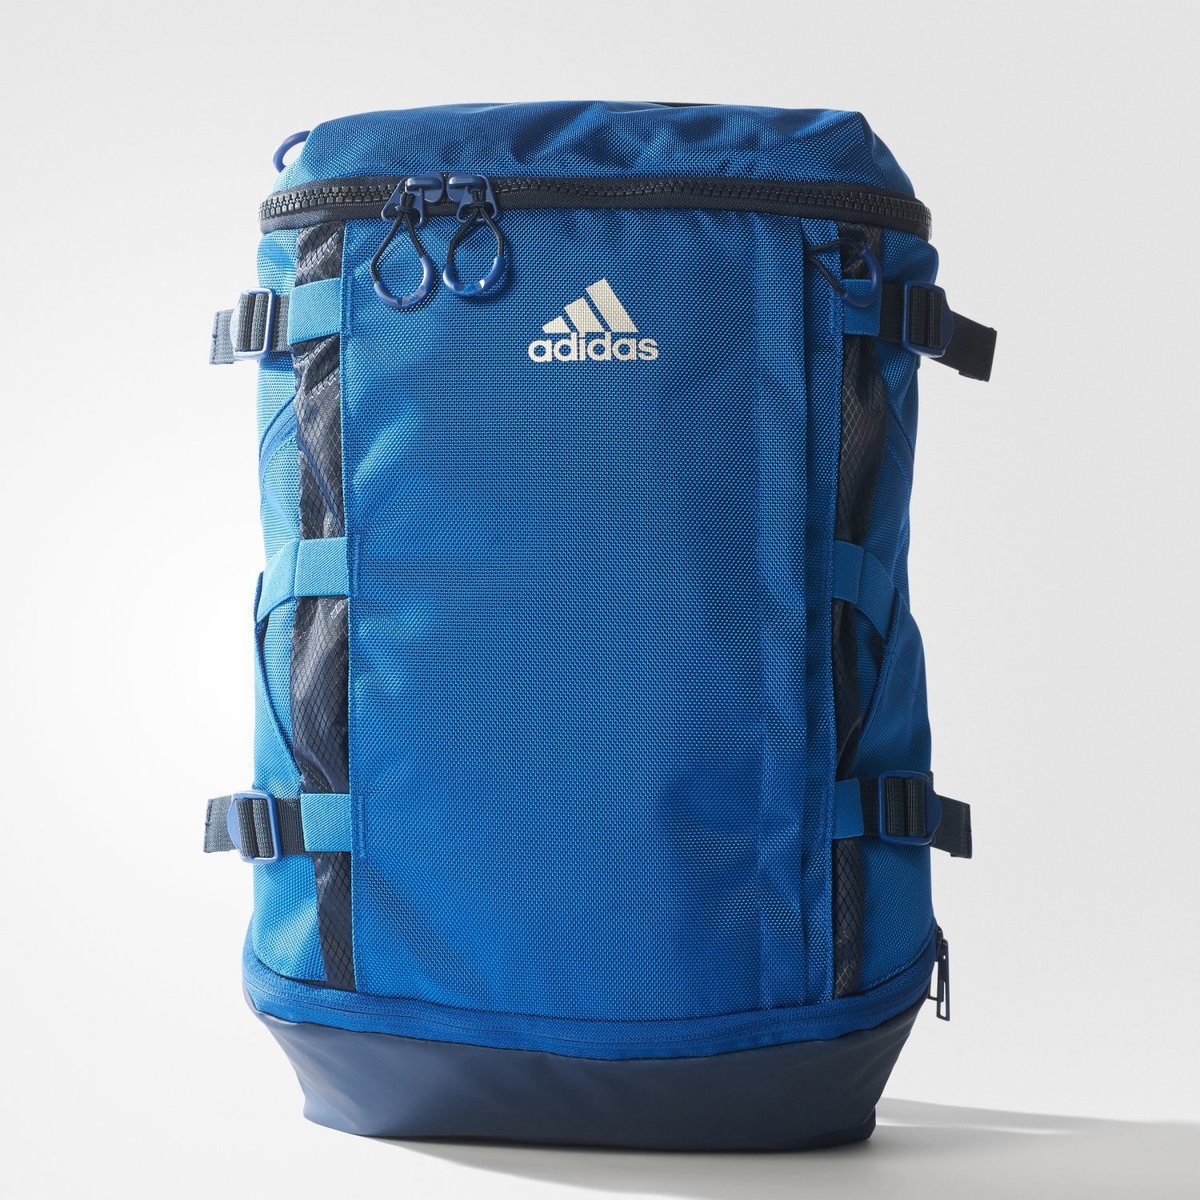 Adidas Blue Backpack 30l Japan Adidas Ops Multi Fuction Shoulders Protection 30l Backpack Hktvmall Online Shopping